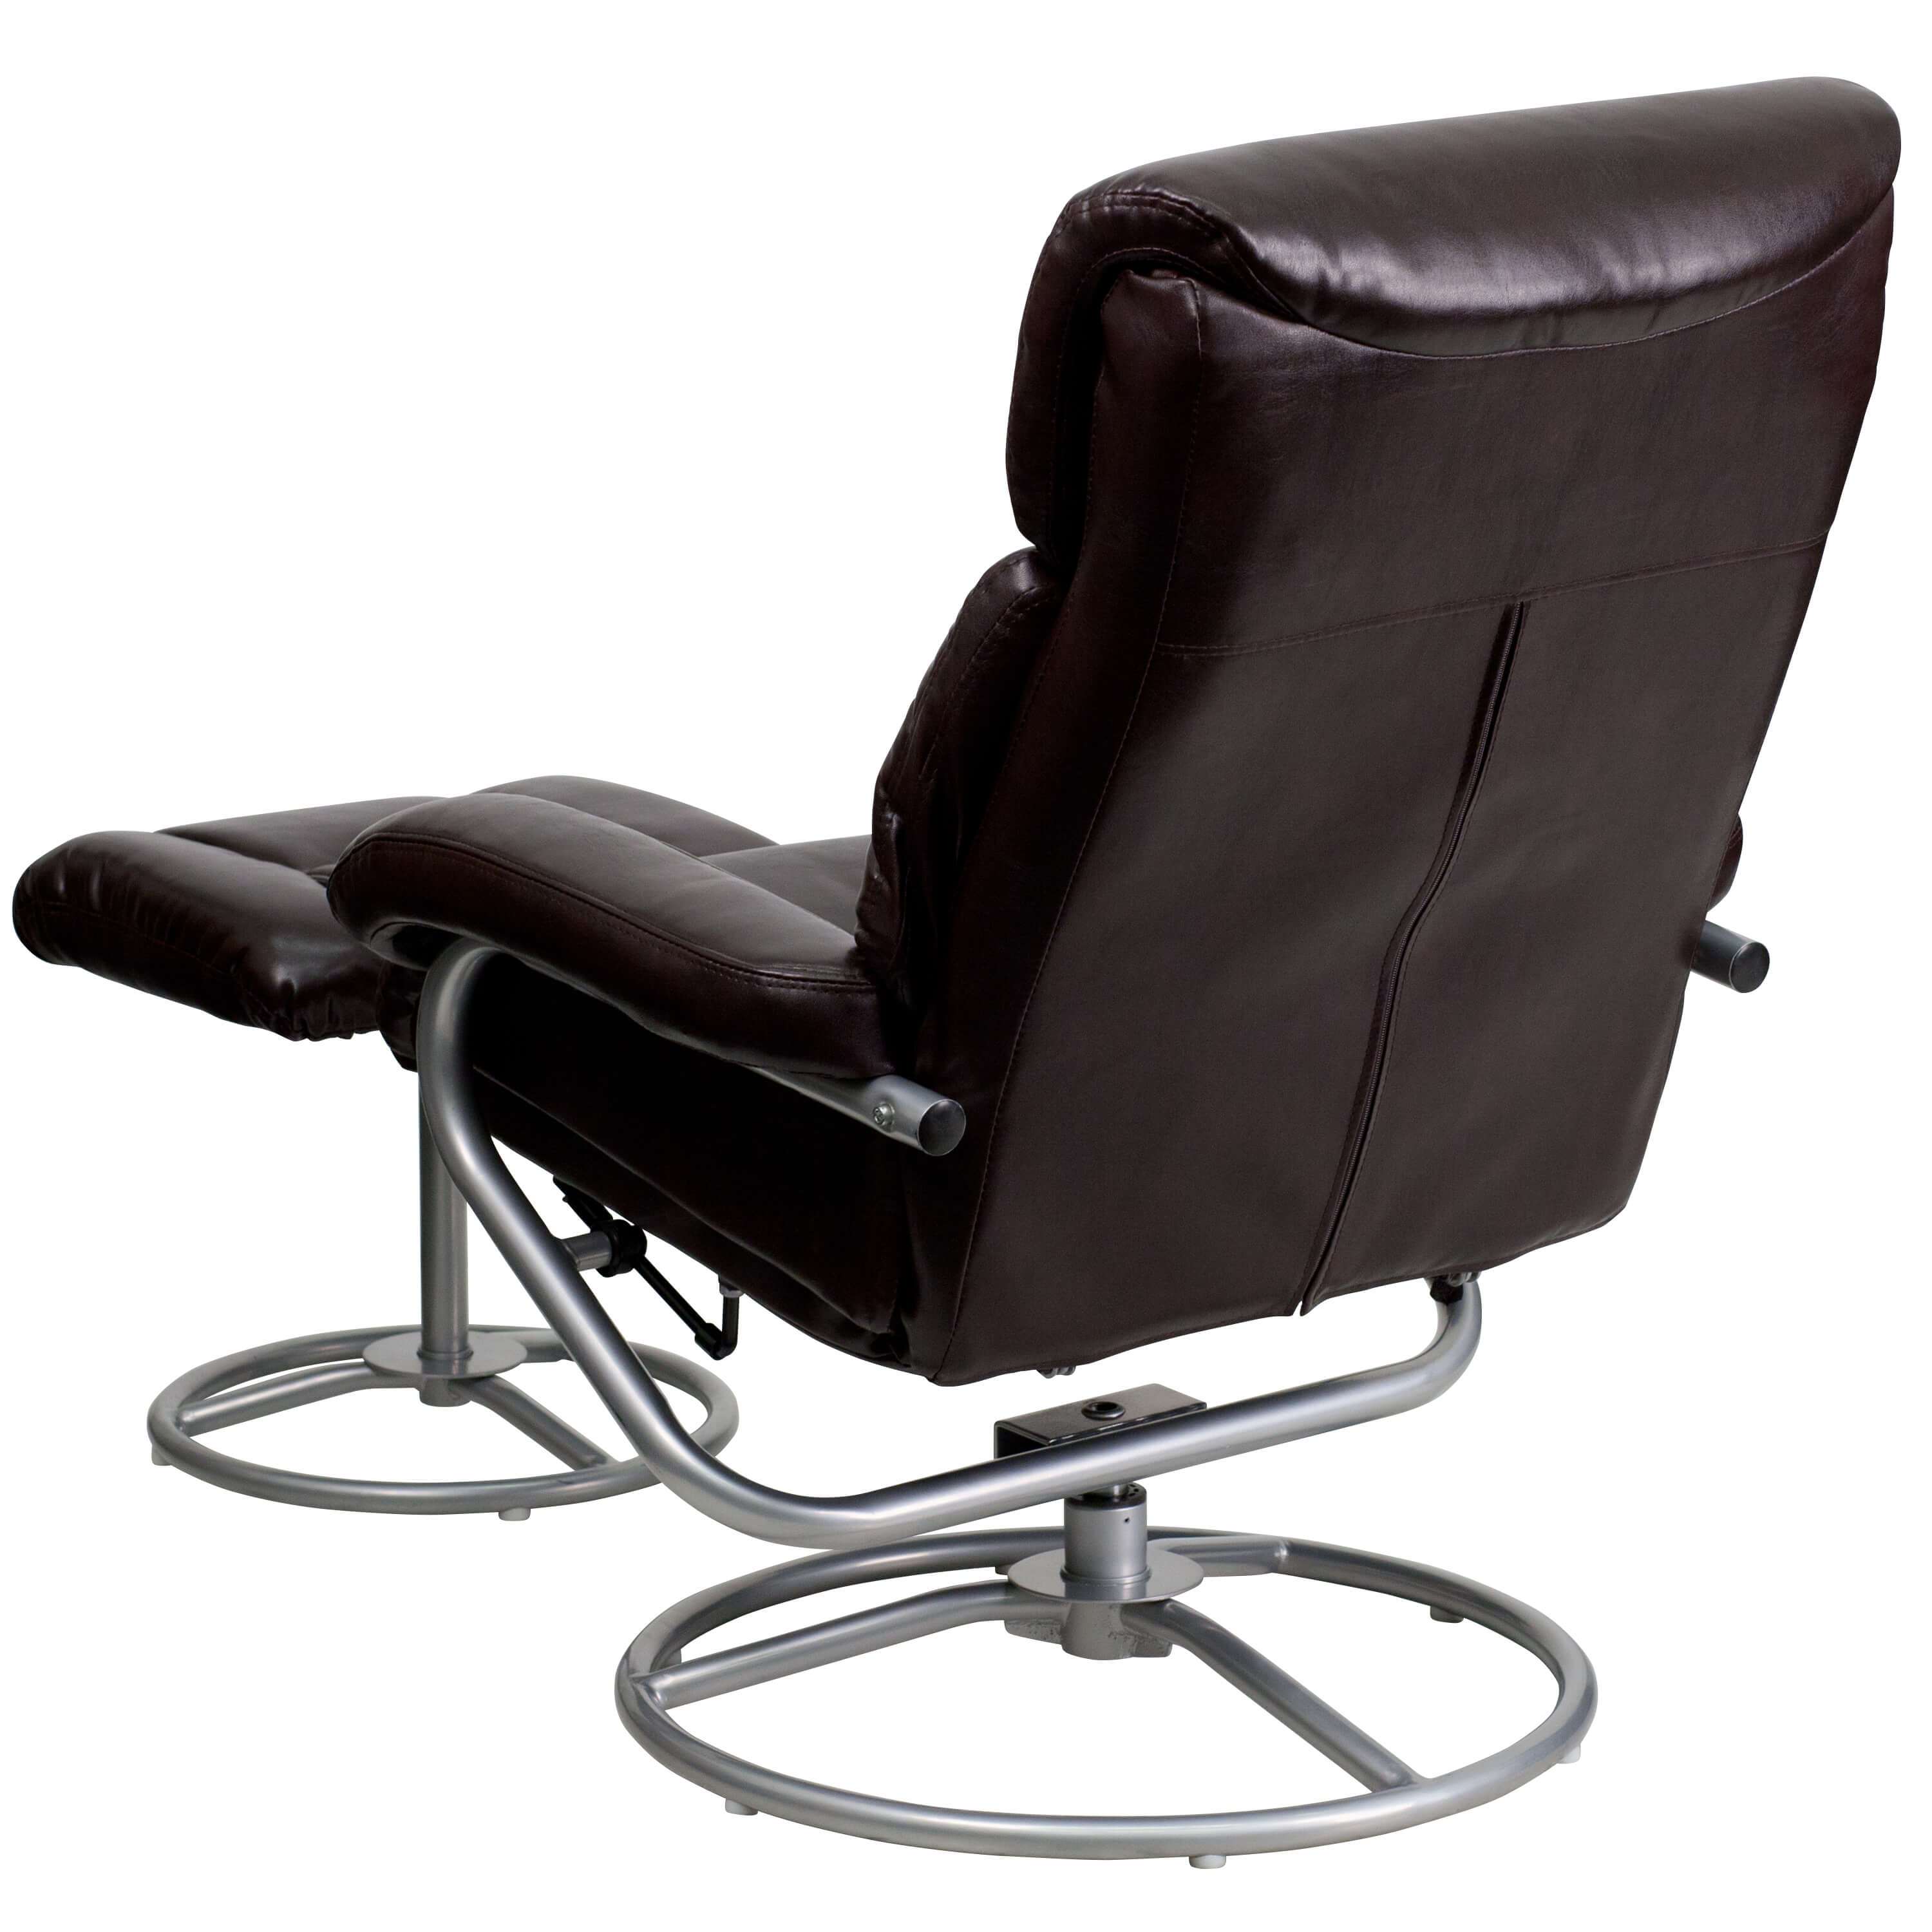 Contemporary leather recliners back view